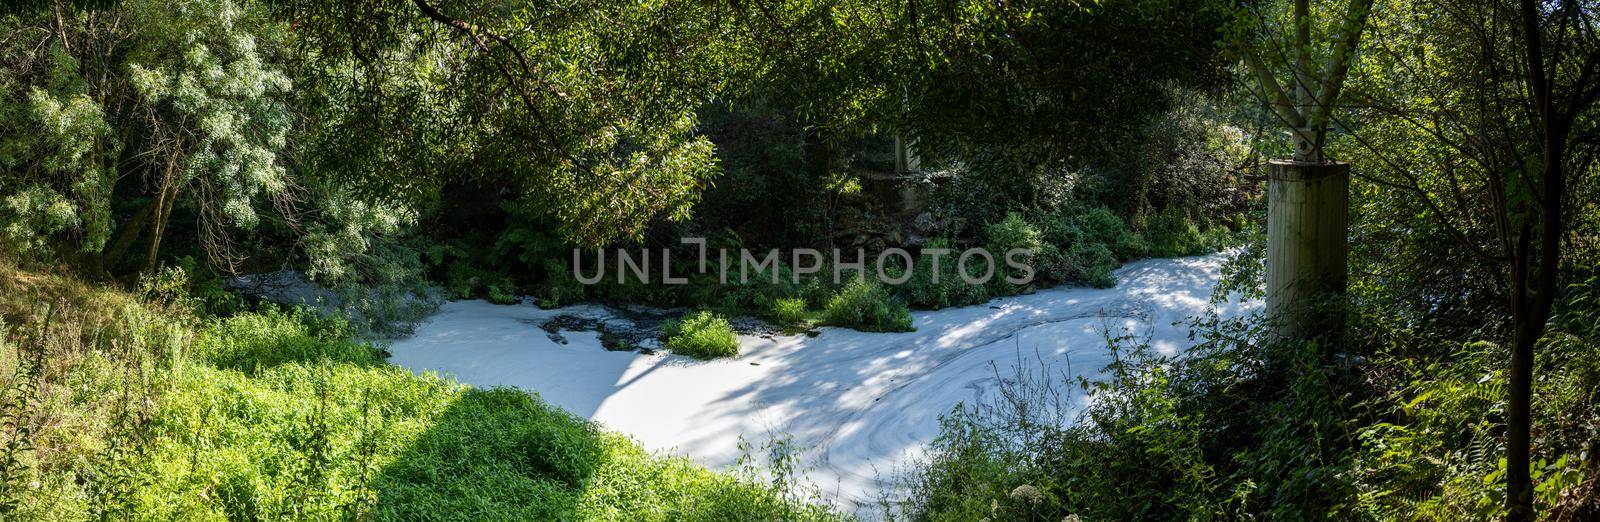 View from under the bridge of white foam pollutants swirling across the water surface floating on river Caima, Palmaz - Oliveira de Azemeis - Portugal.